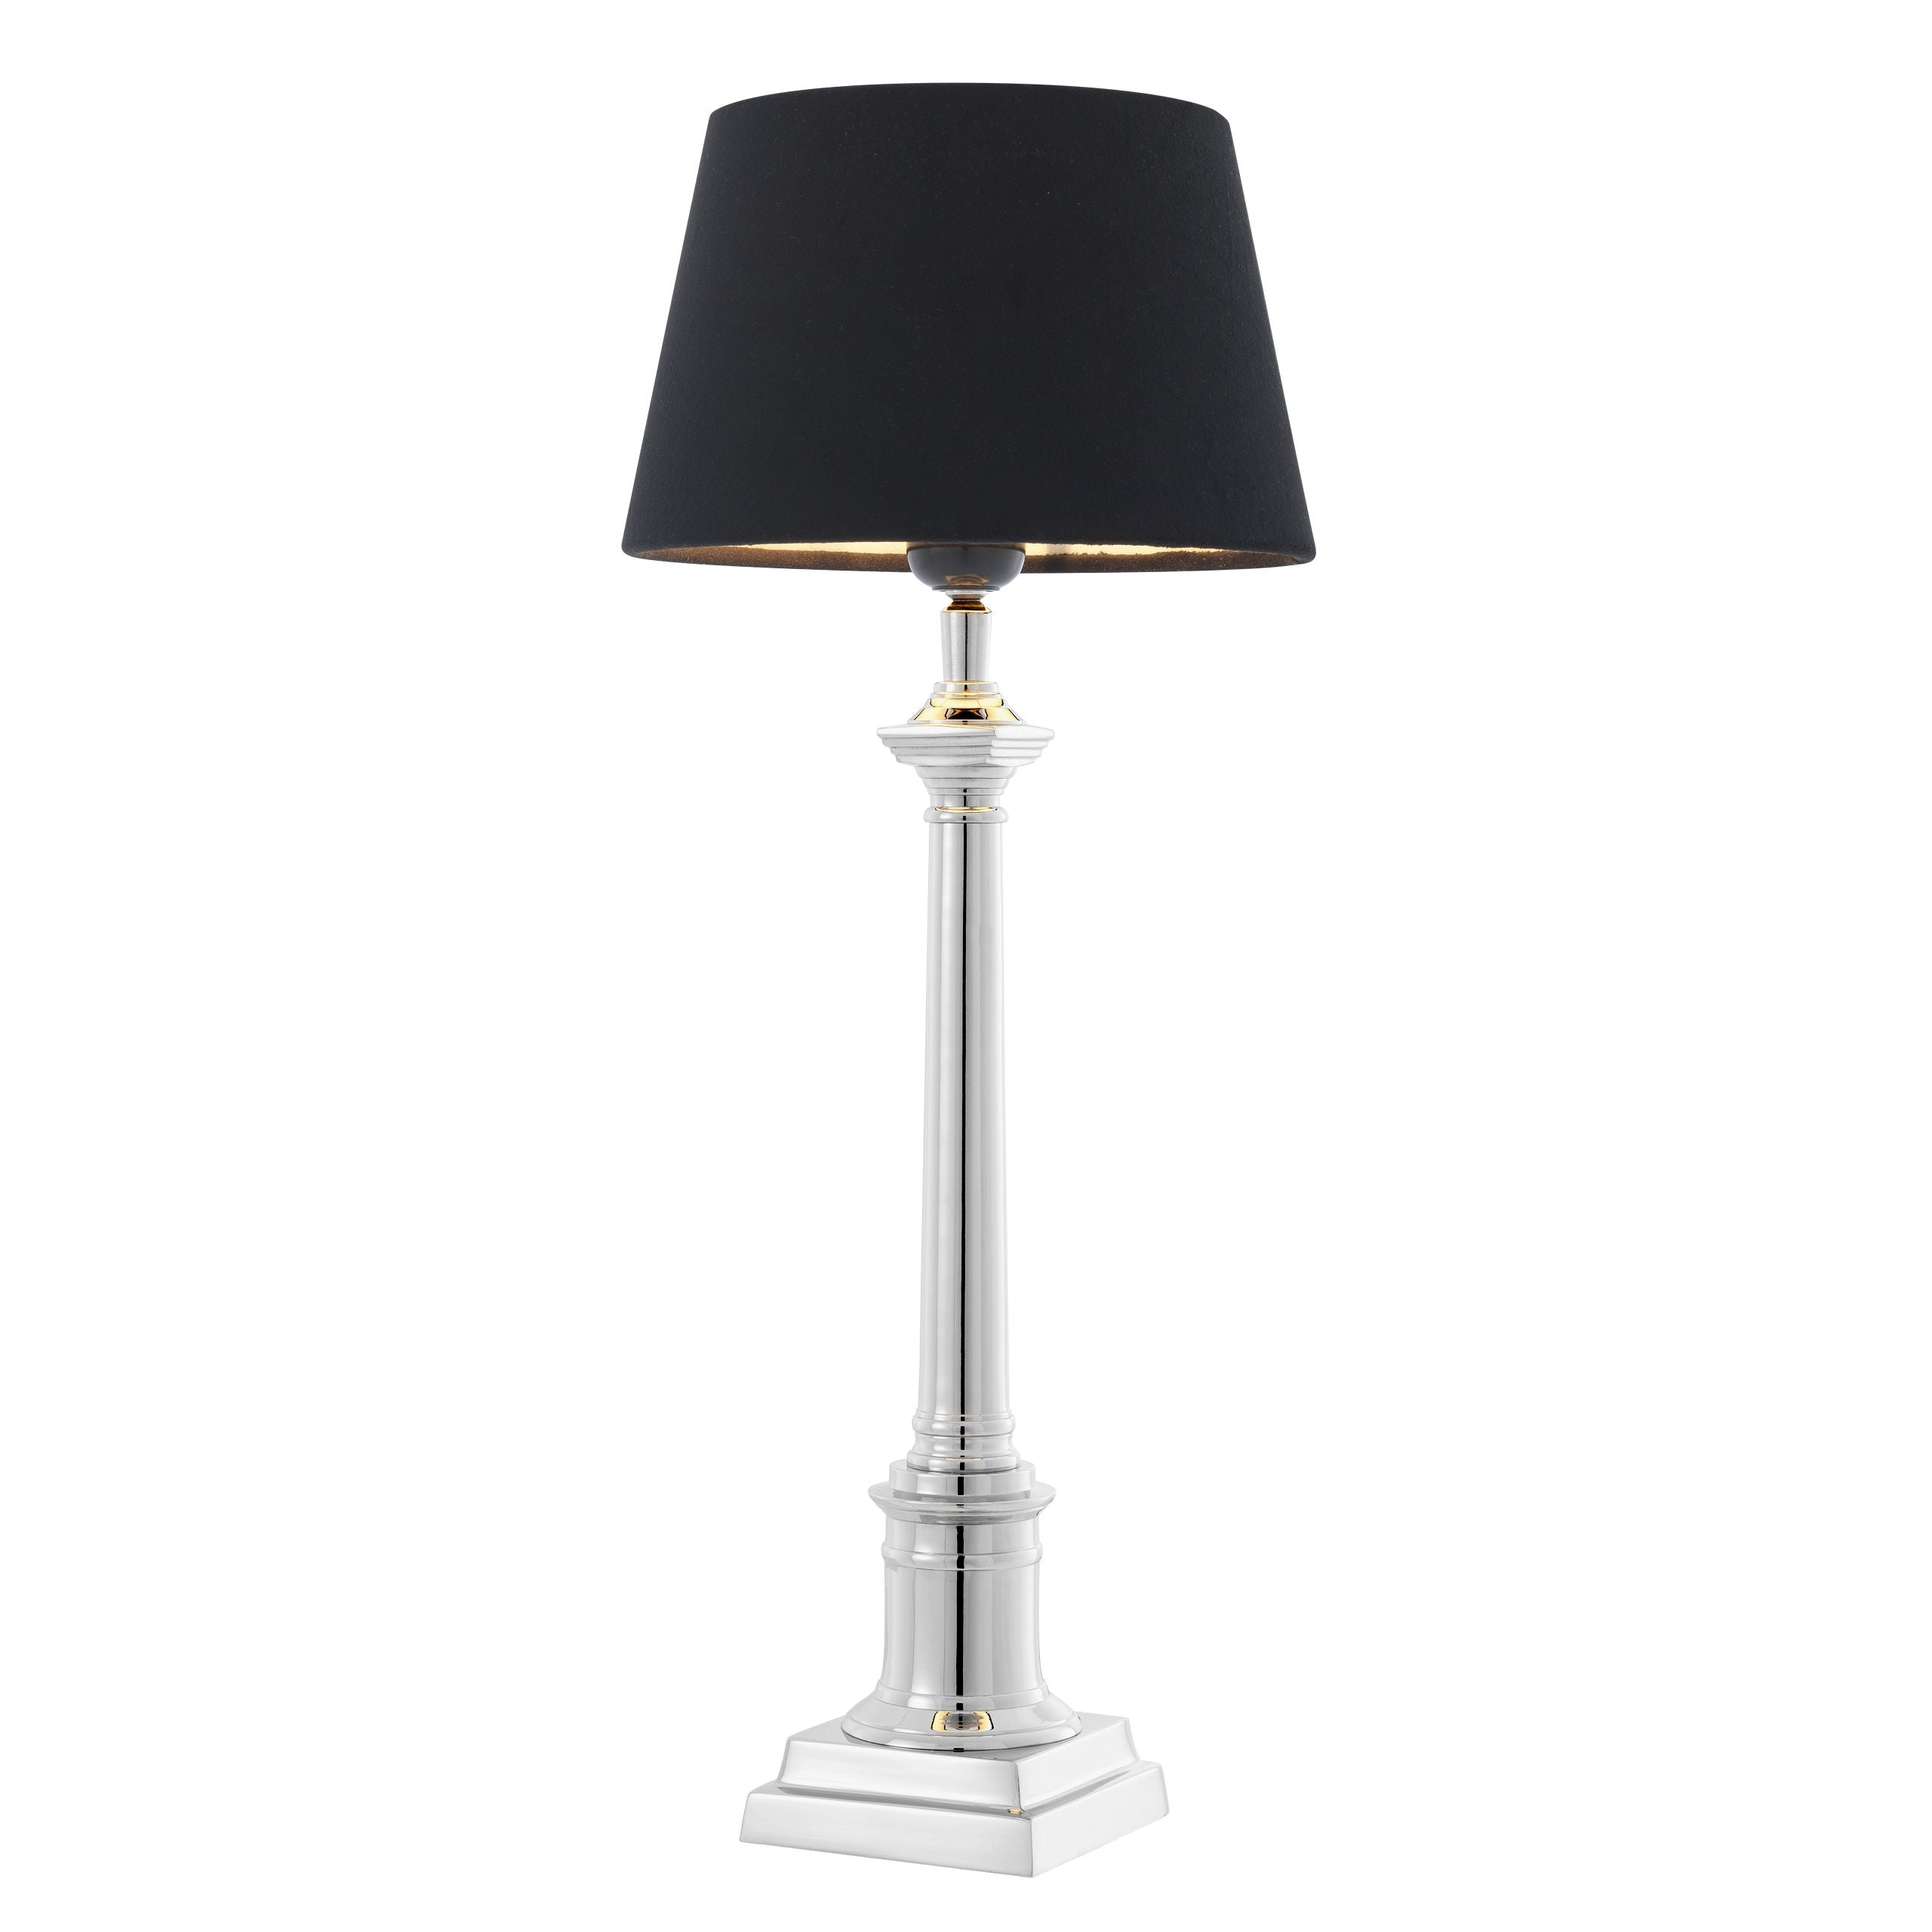 Cologne S Table Lamps - [Brass/Nickel] - Eichholtz - Luxury Lighting Boutique